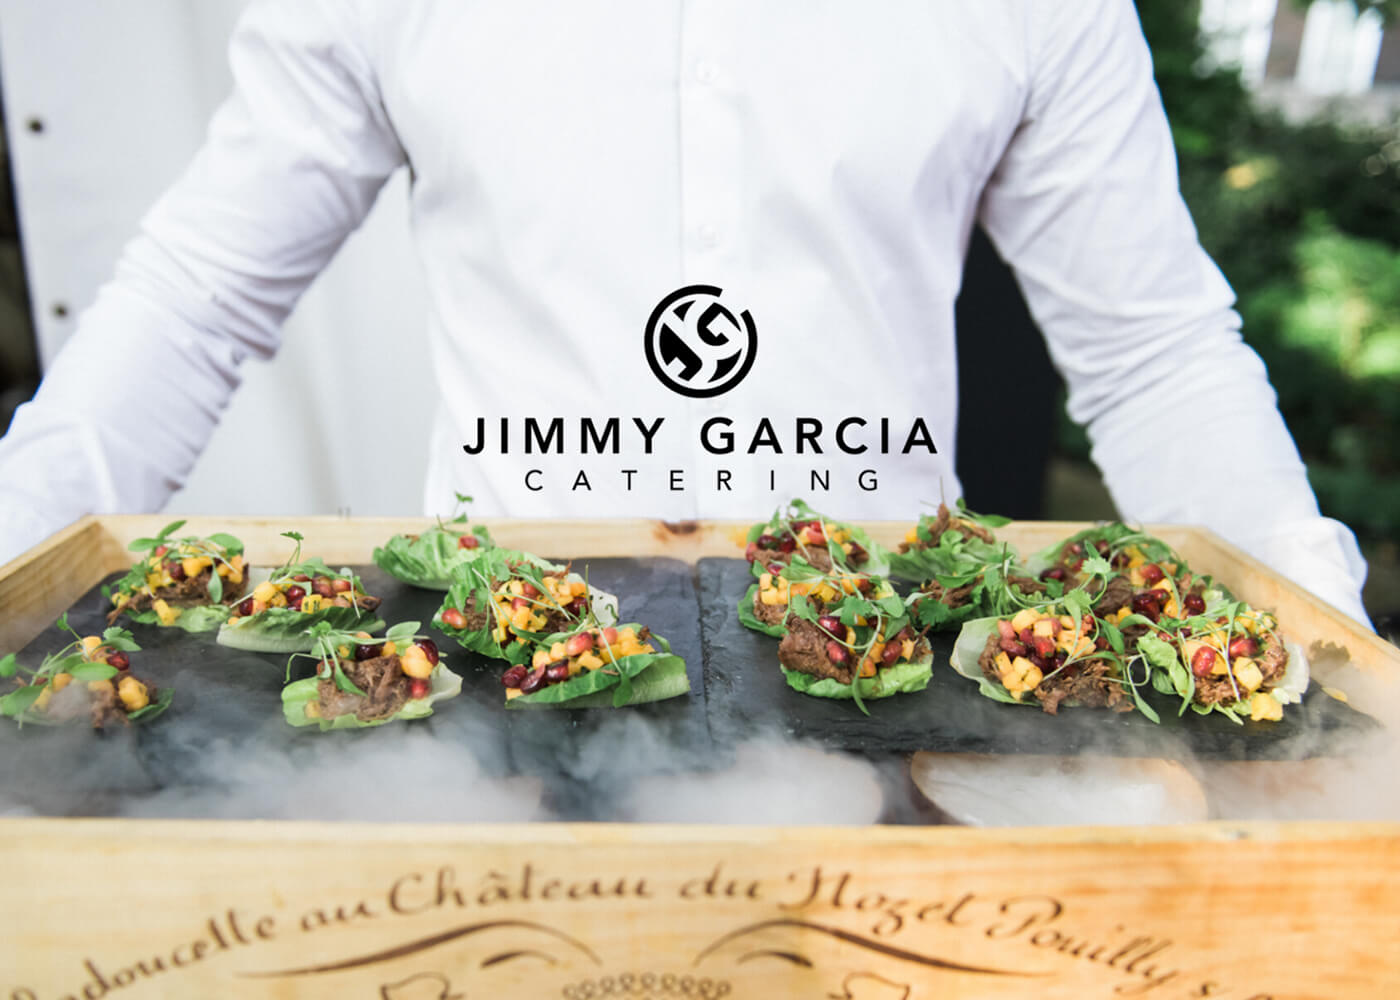 Jimmy Garcia Catering